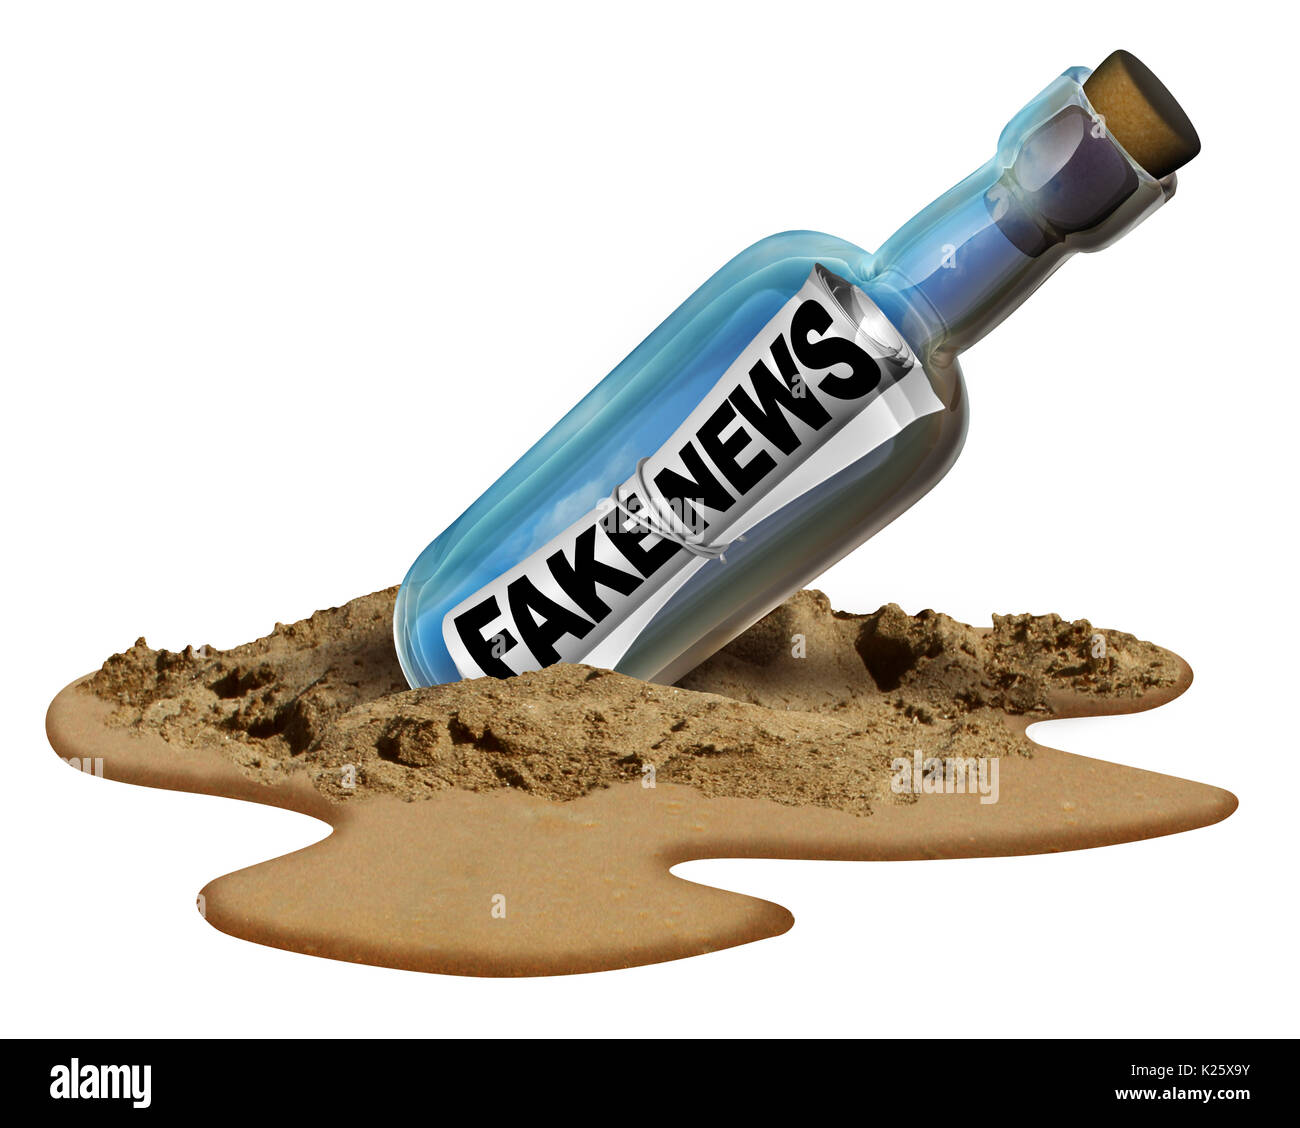 Fake news communication symbol and hoax journalistic reporting as a message in a bottle as text as false media reporting metaphor. Stock Photo